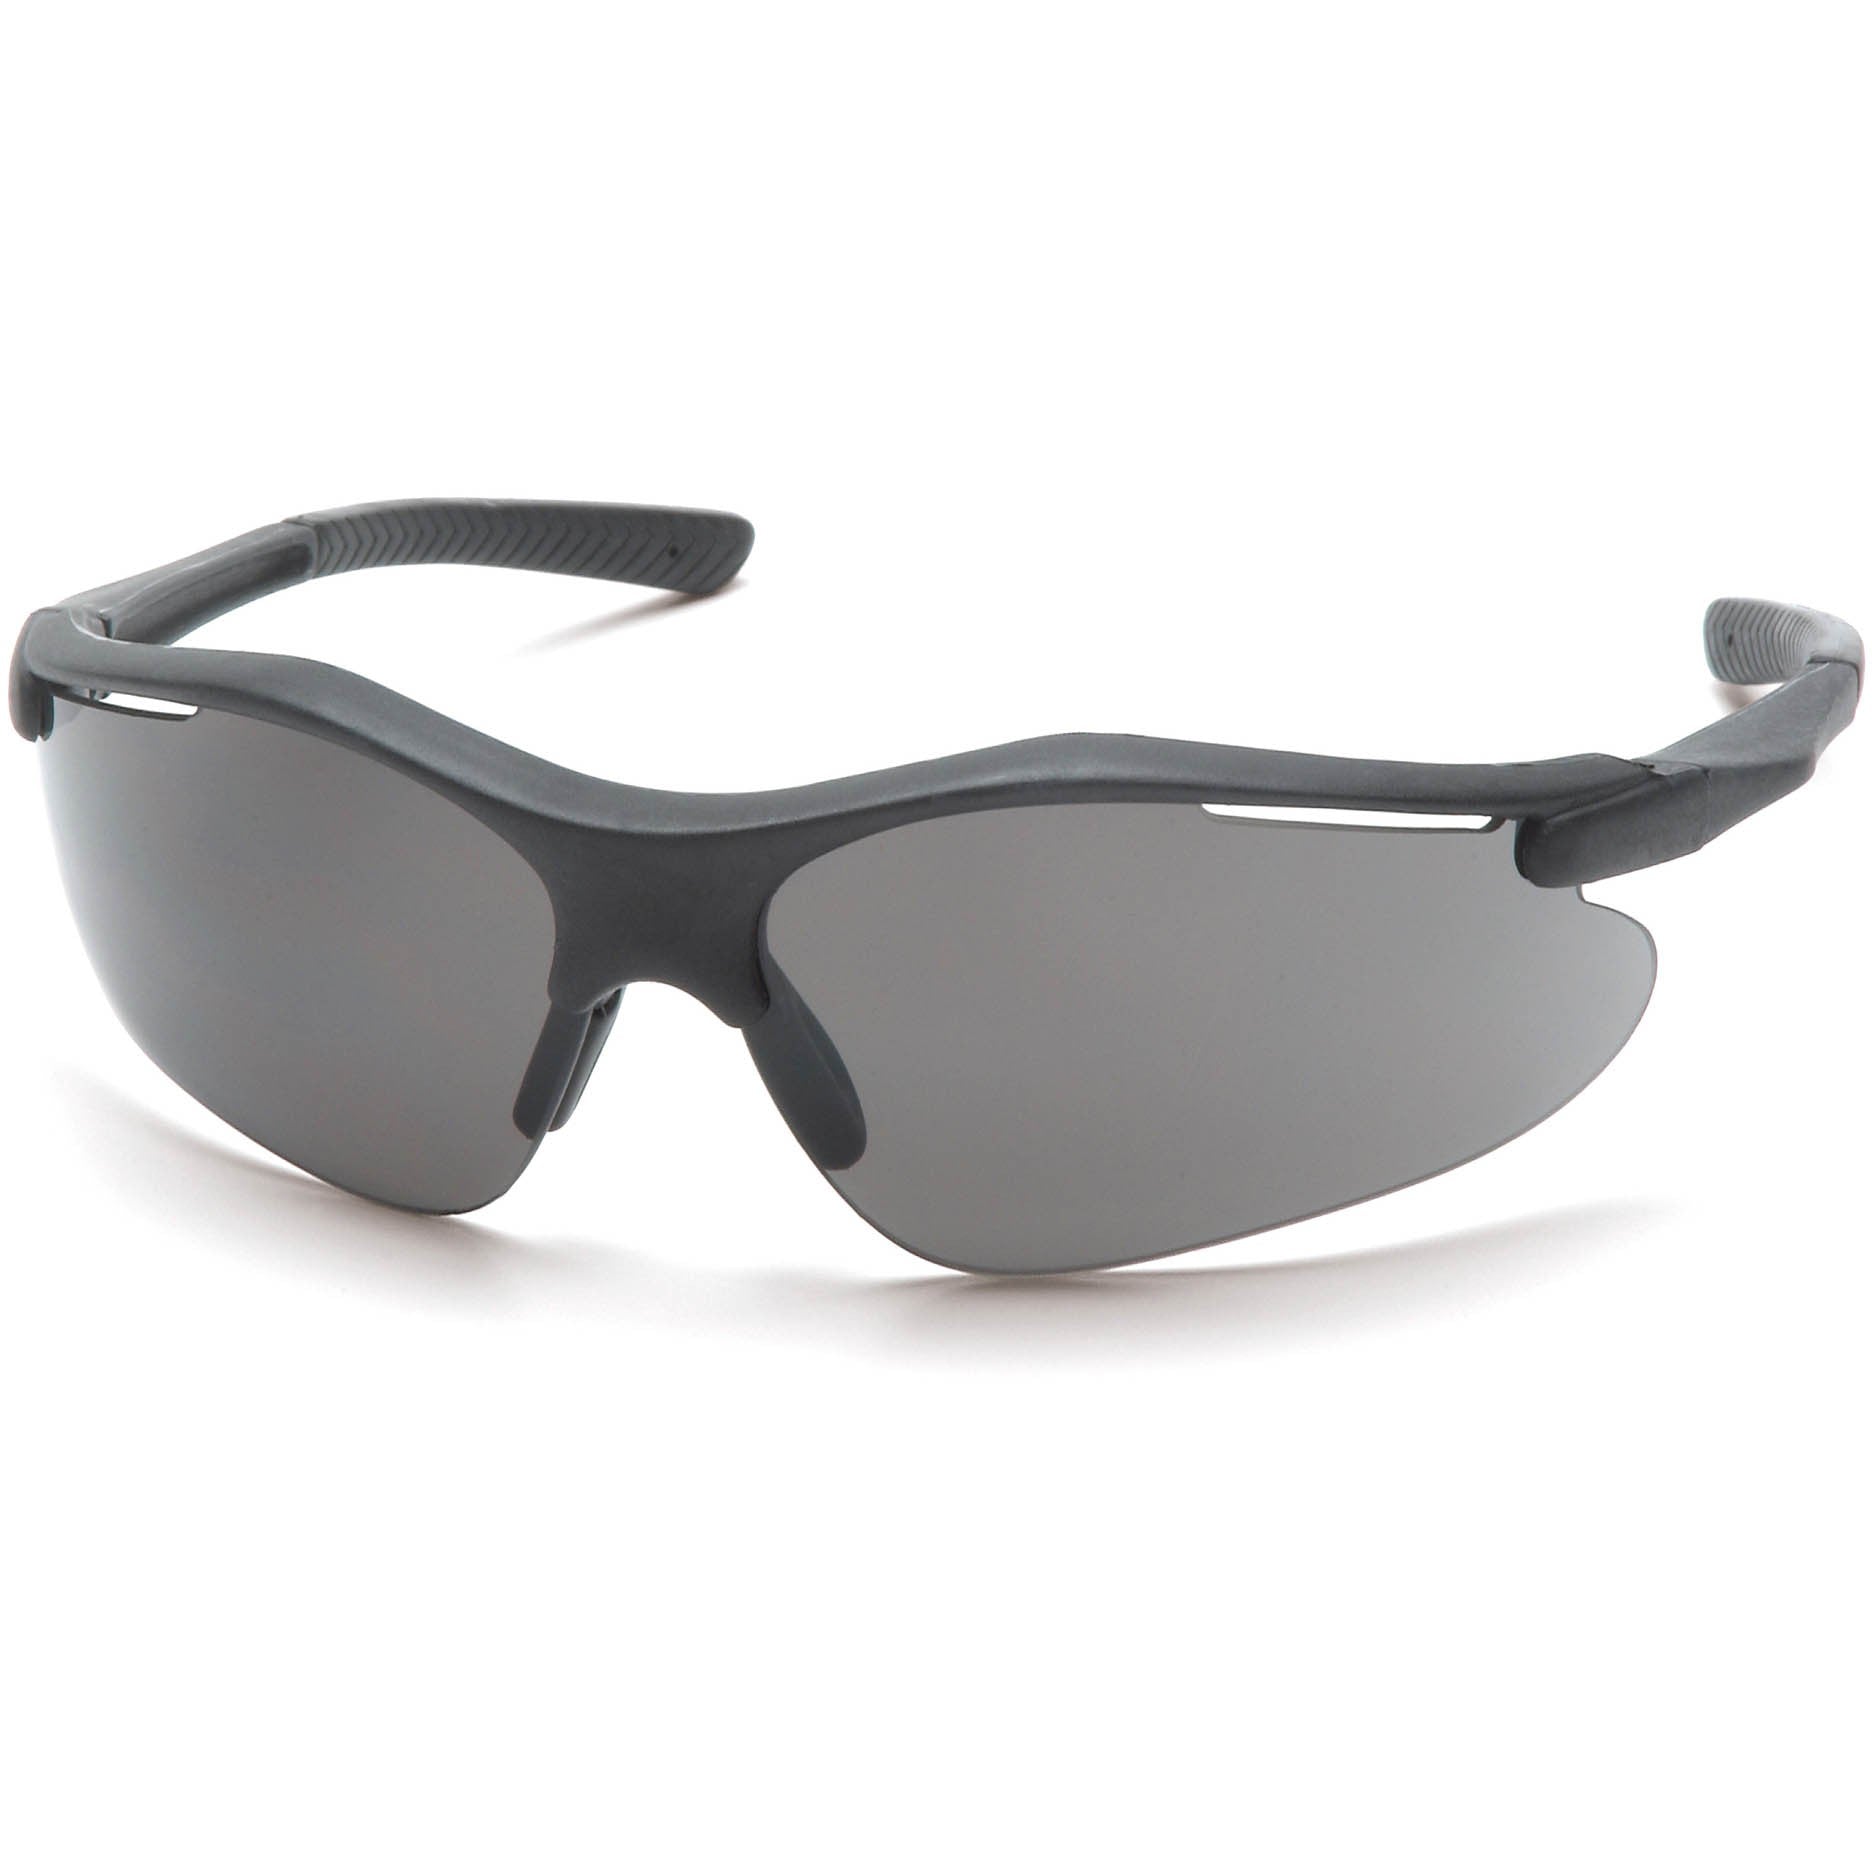 Pyramex Fortress Safety Glasses